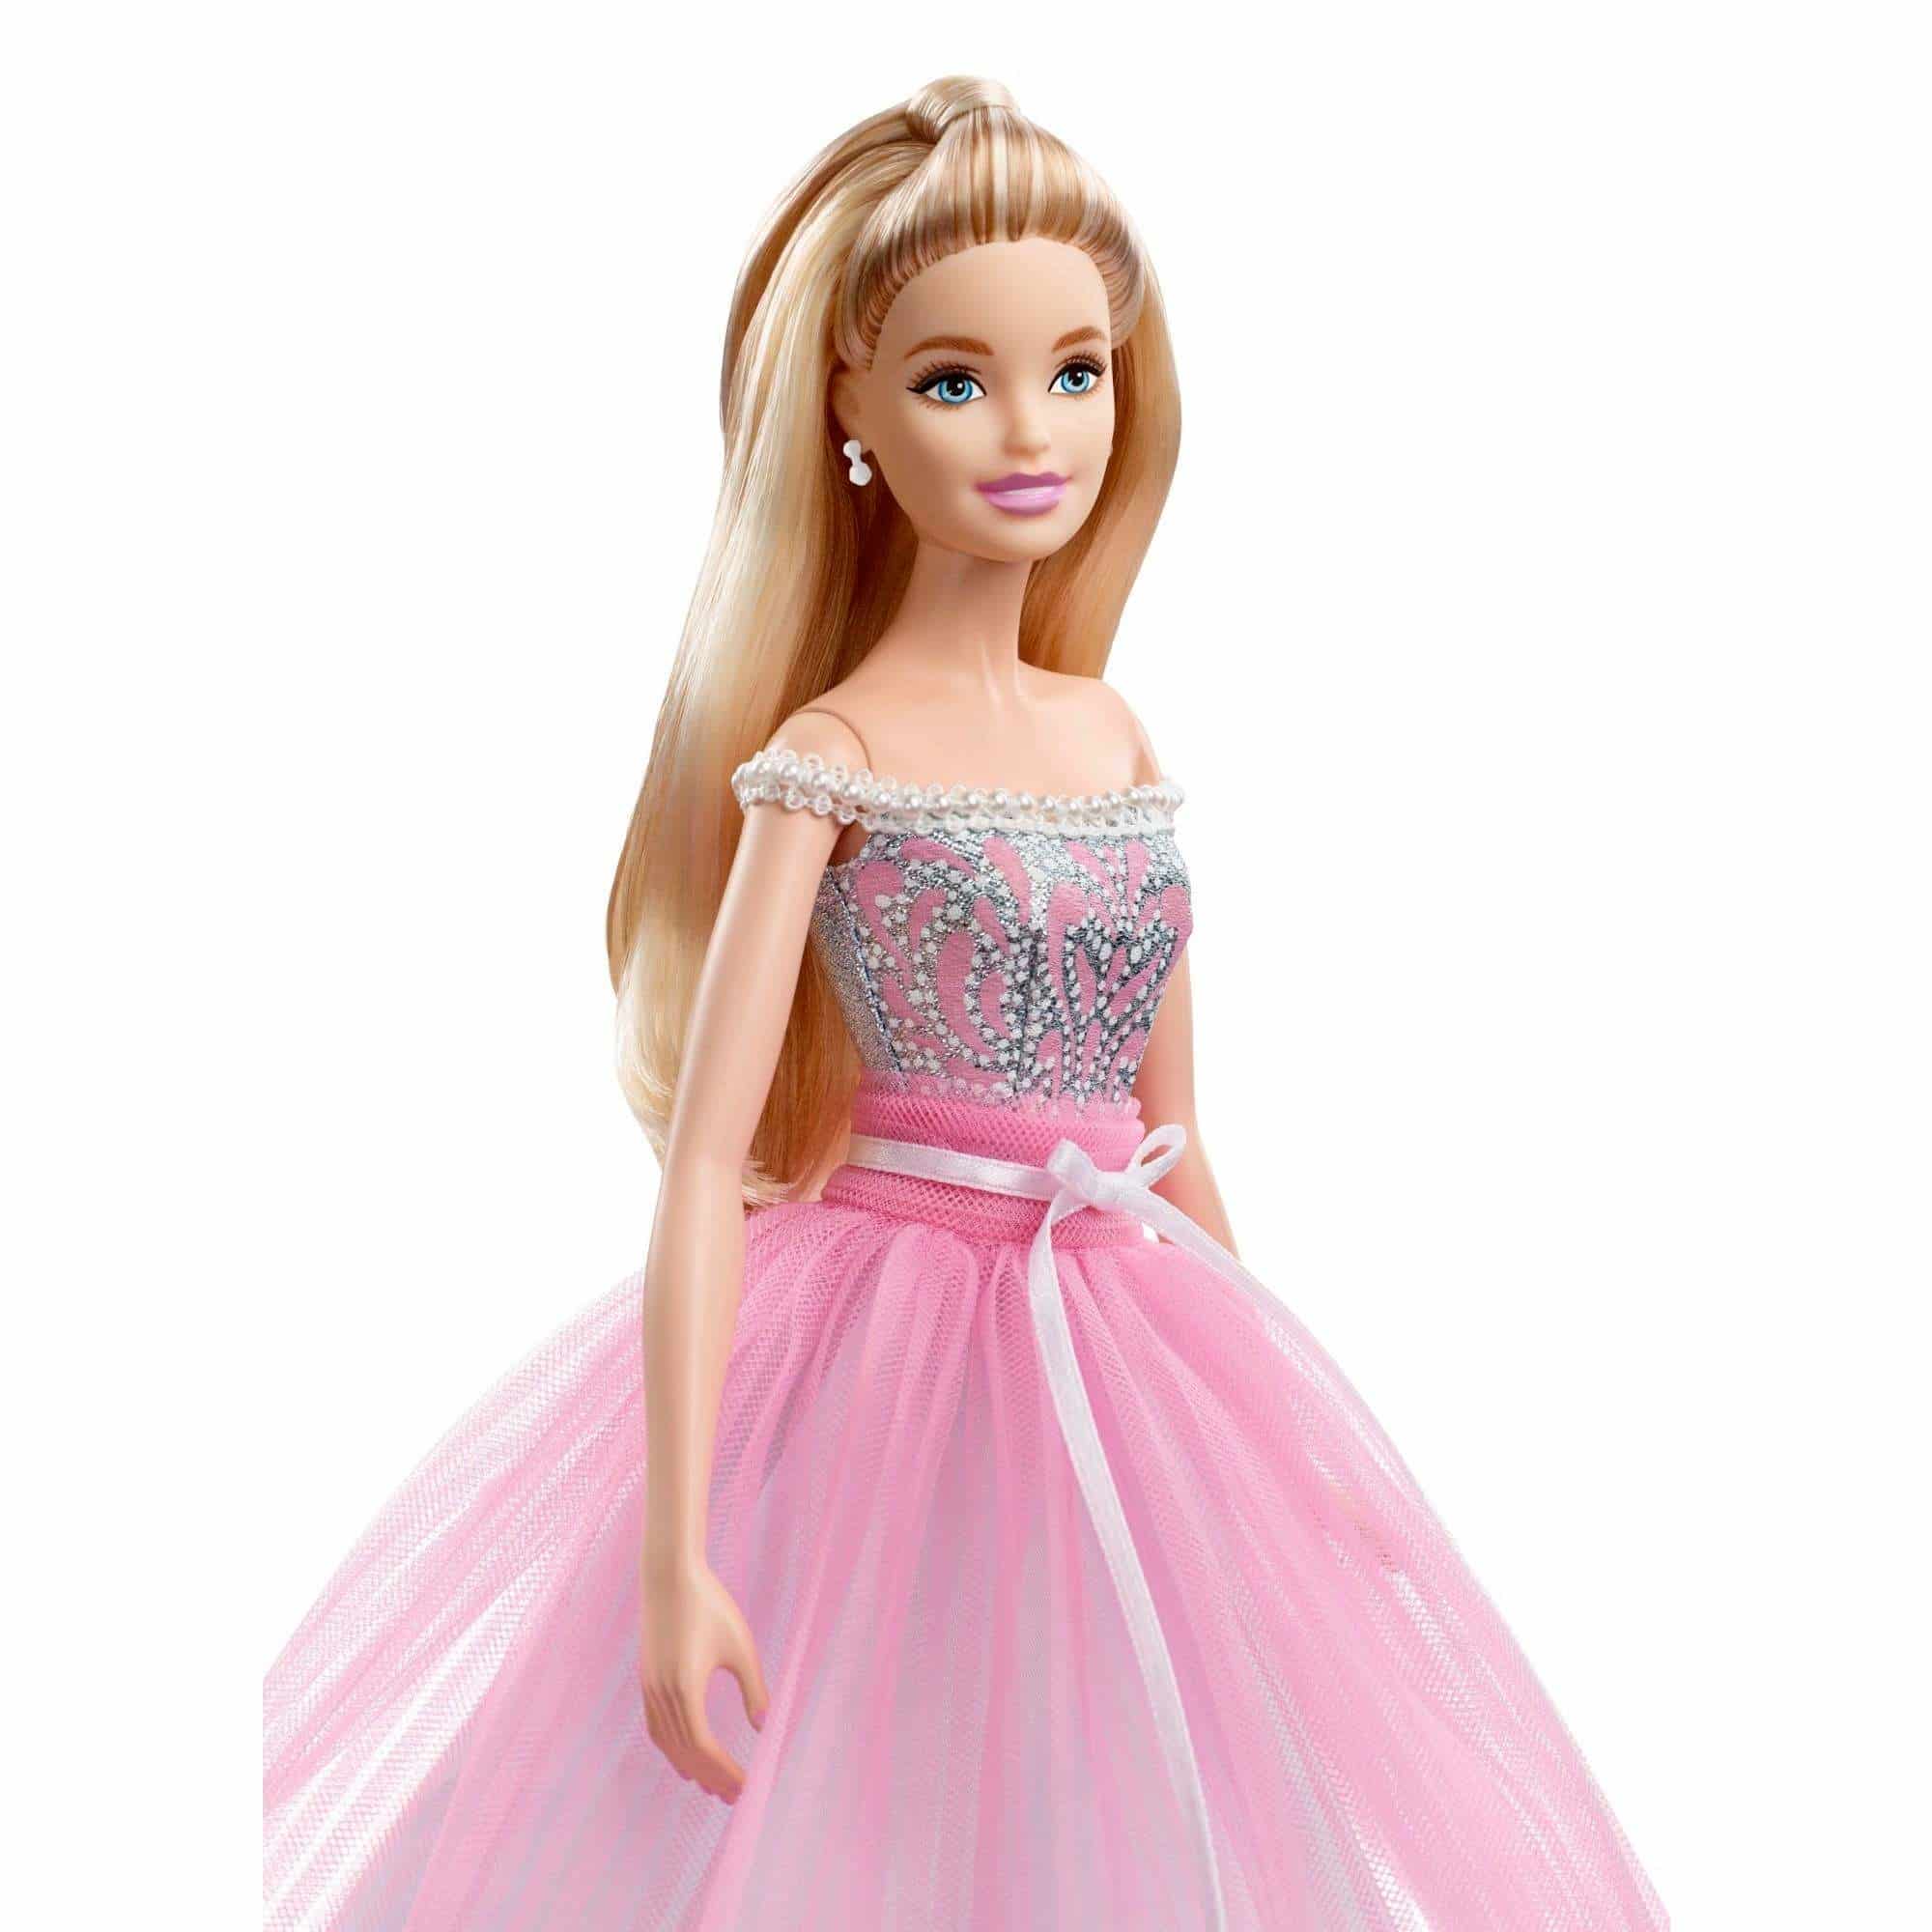 Barbie® - Signature Collection - Birthday Wishes